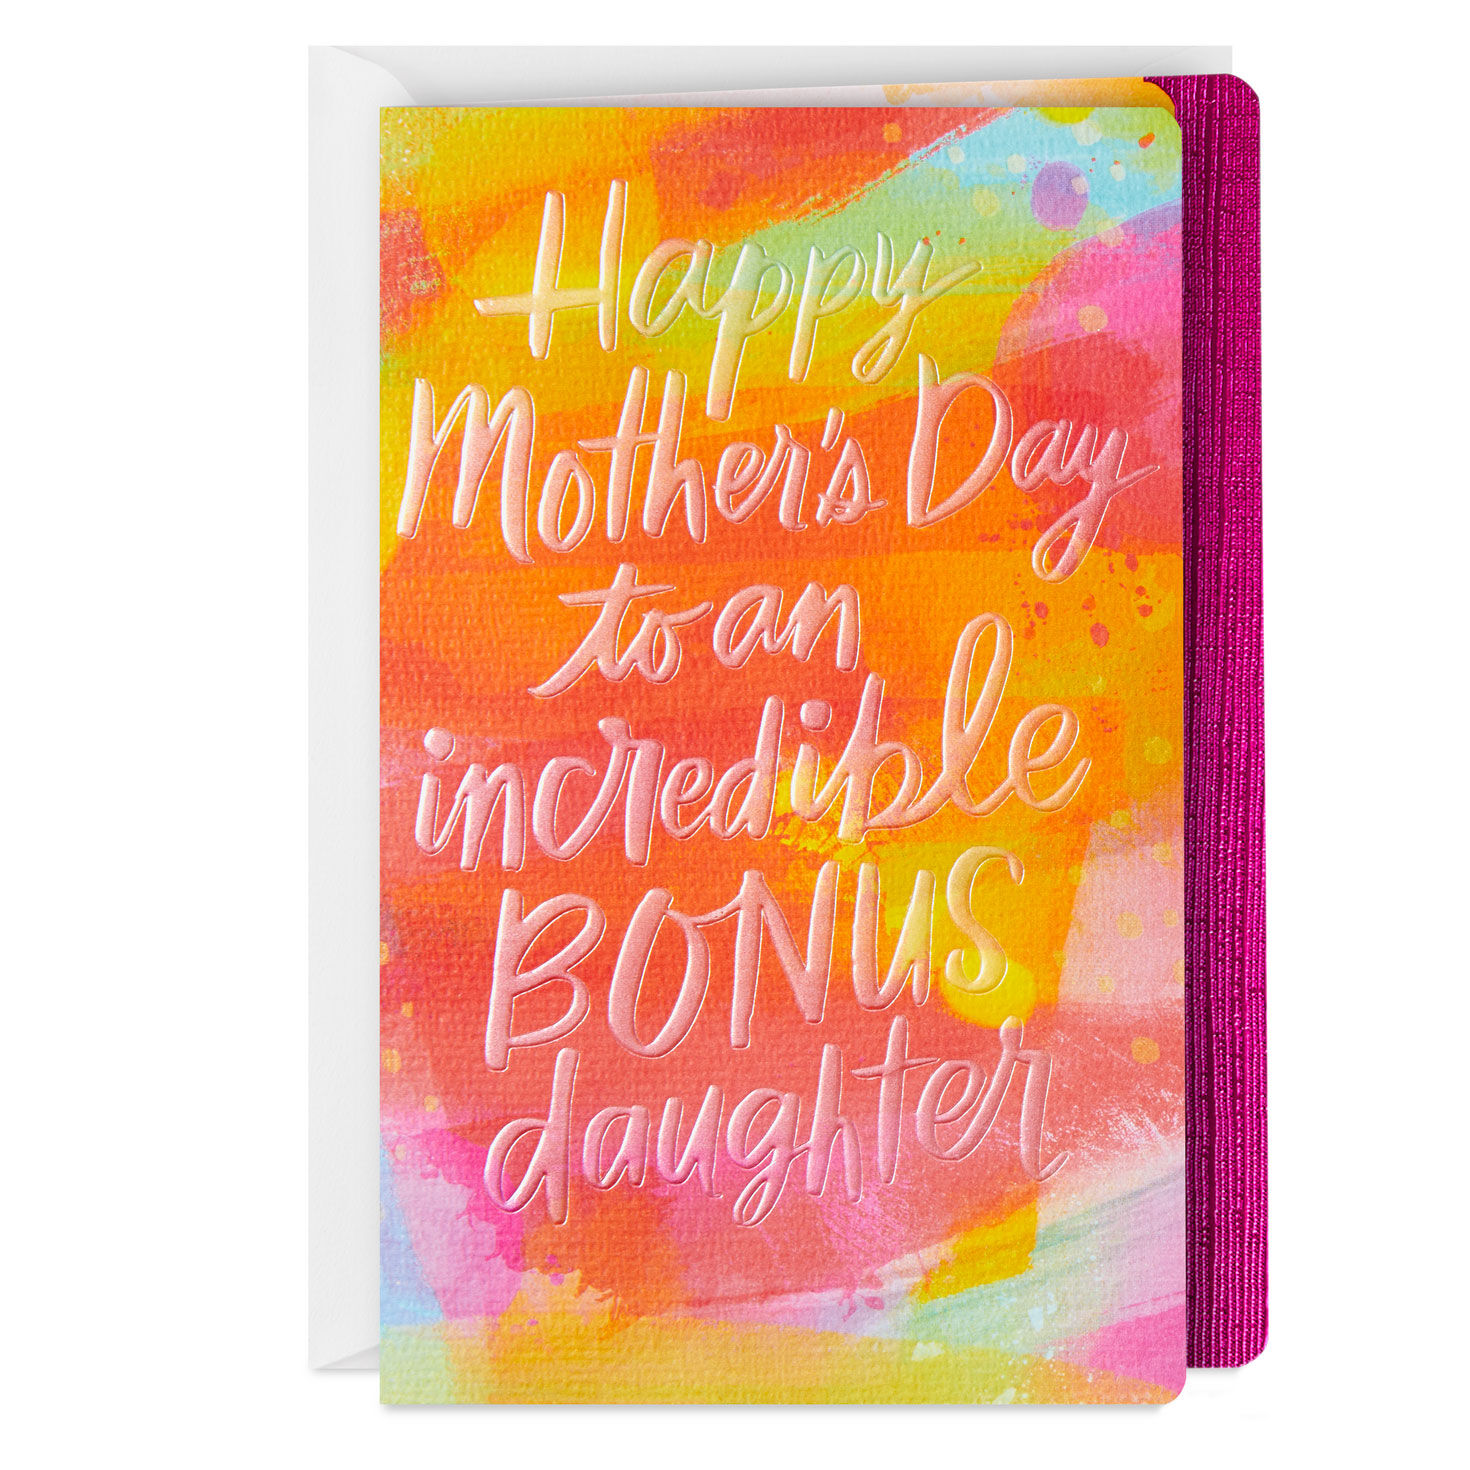 Incredible Bonus Daughter Mother's Day Card for Daughter-in-Law for only USD 5.59 | Hallmark